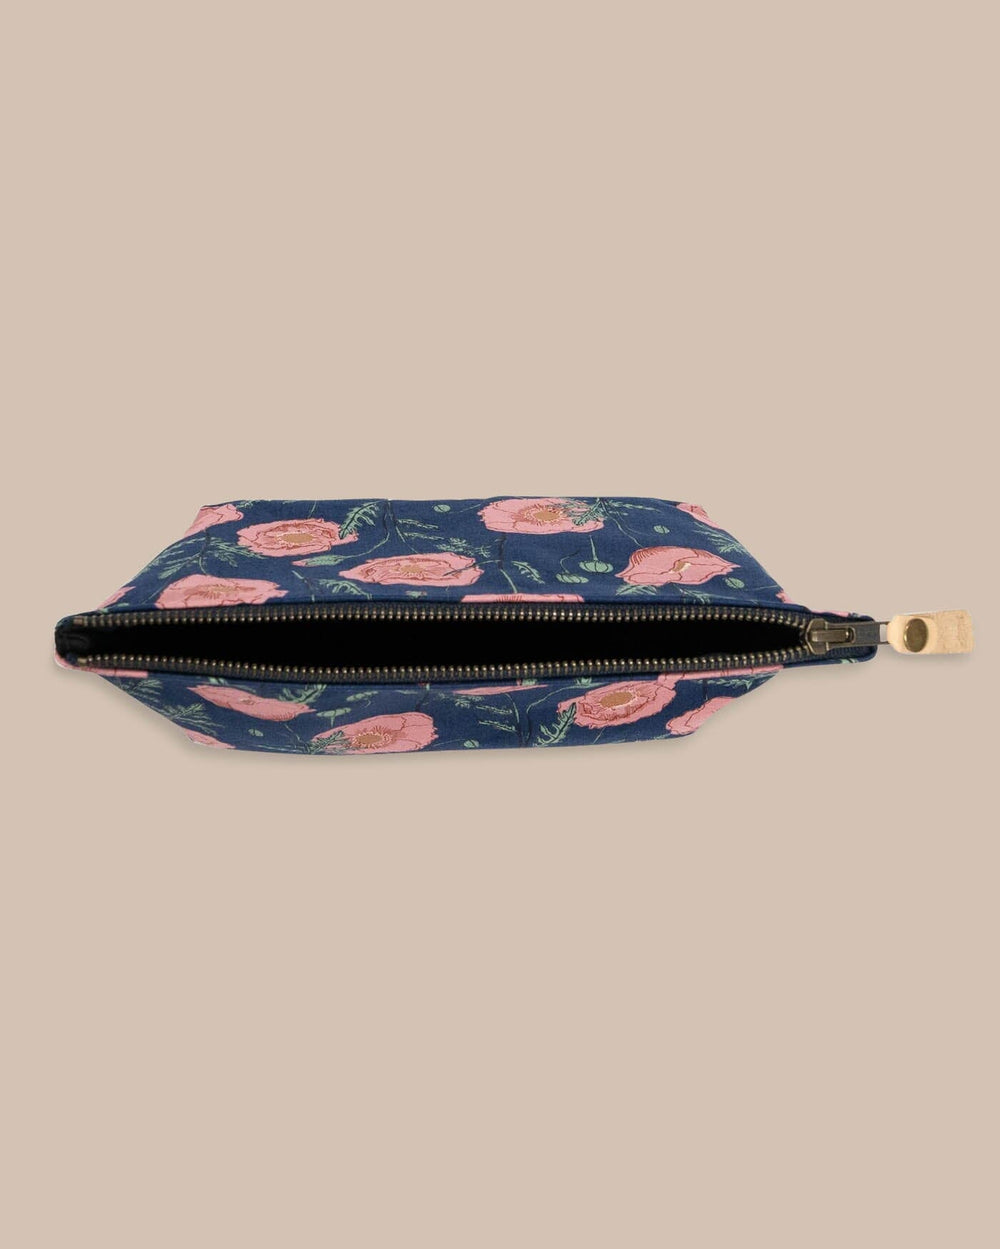 The detail view of the Southern Tide Floral Travel Clutch by Southern Tide - Navy